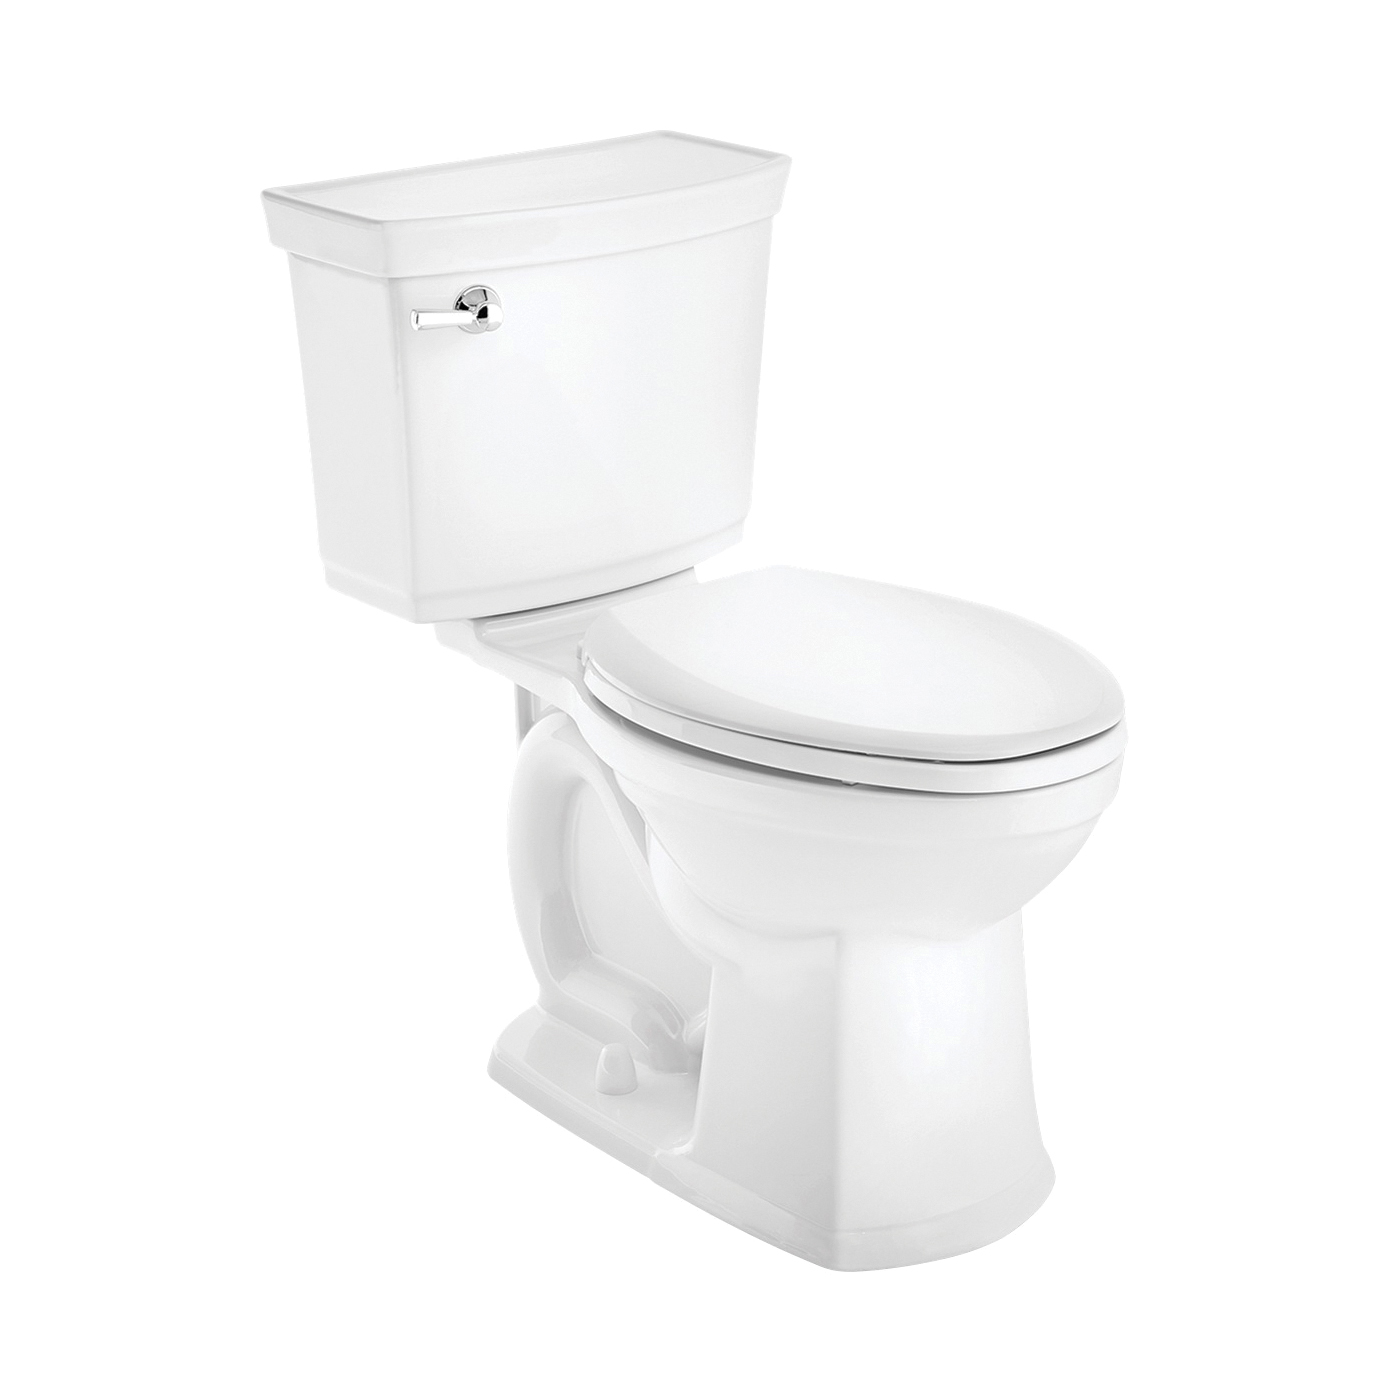 VorMax 727AA121.020 Complete Toilet, Elongated Bowl, 1.28 gpf Flush, 12 in Rough-In, 16-1/2 in H Rim